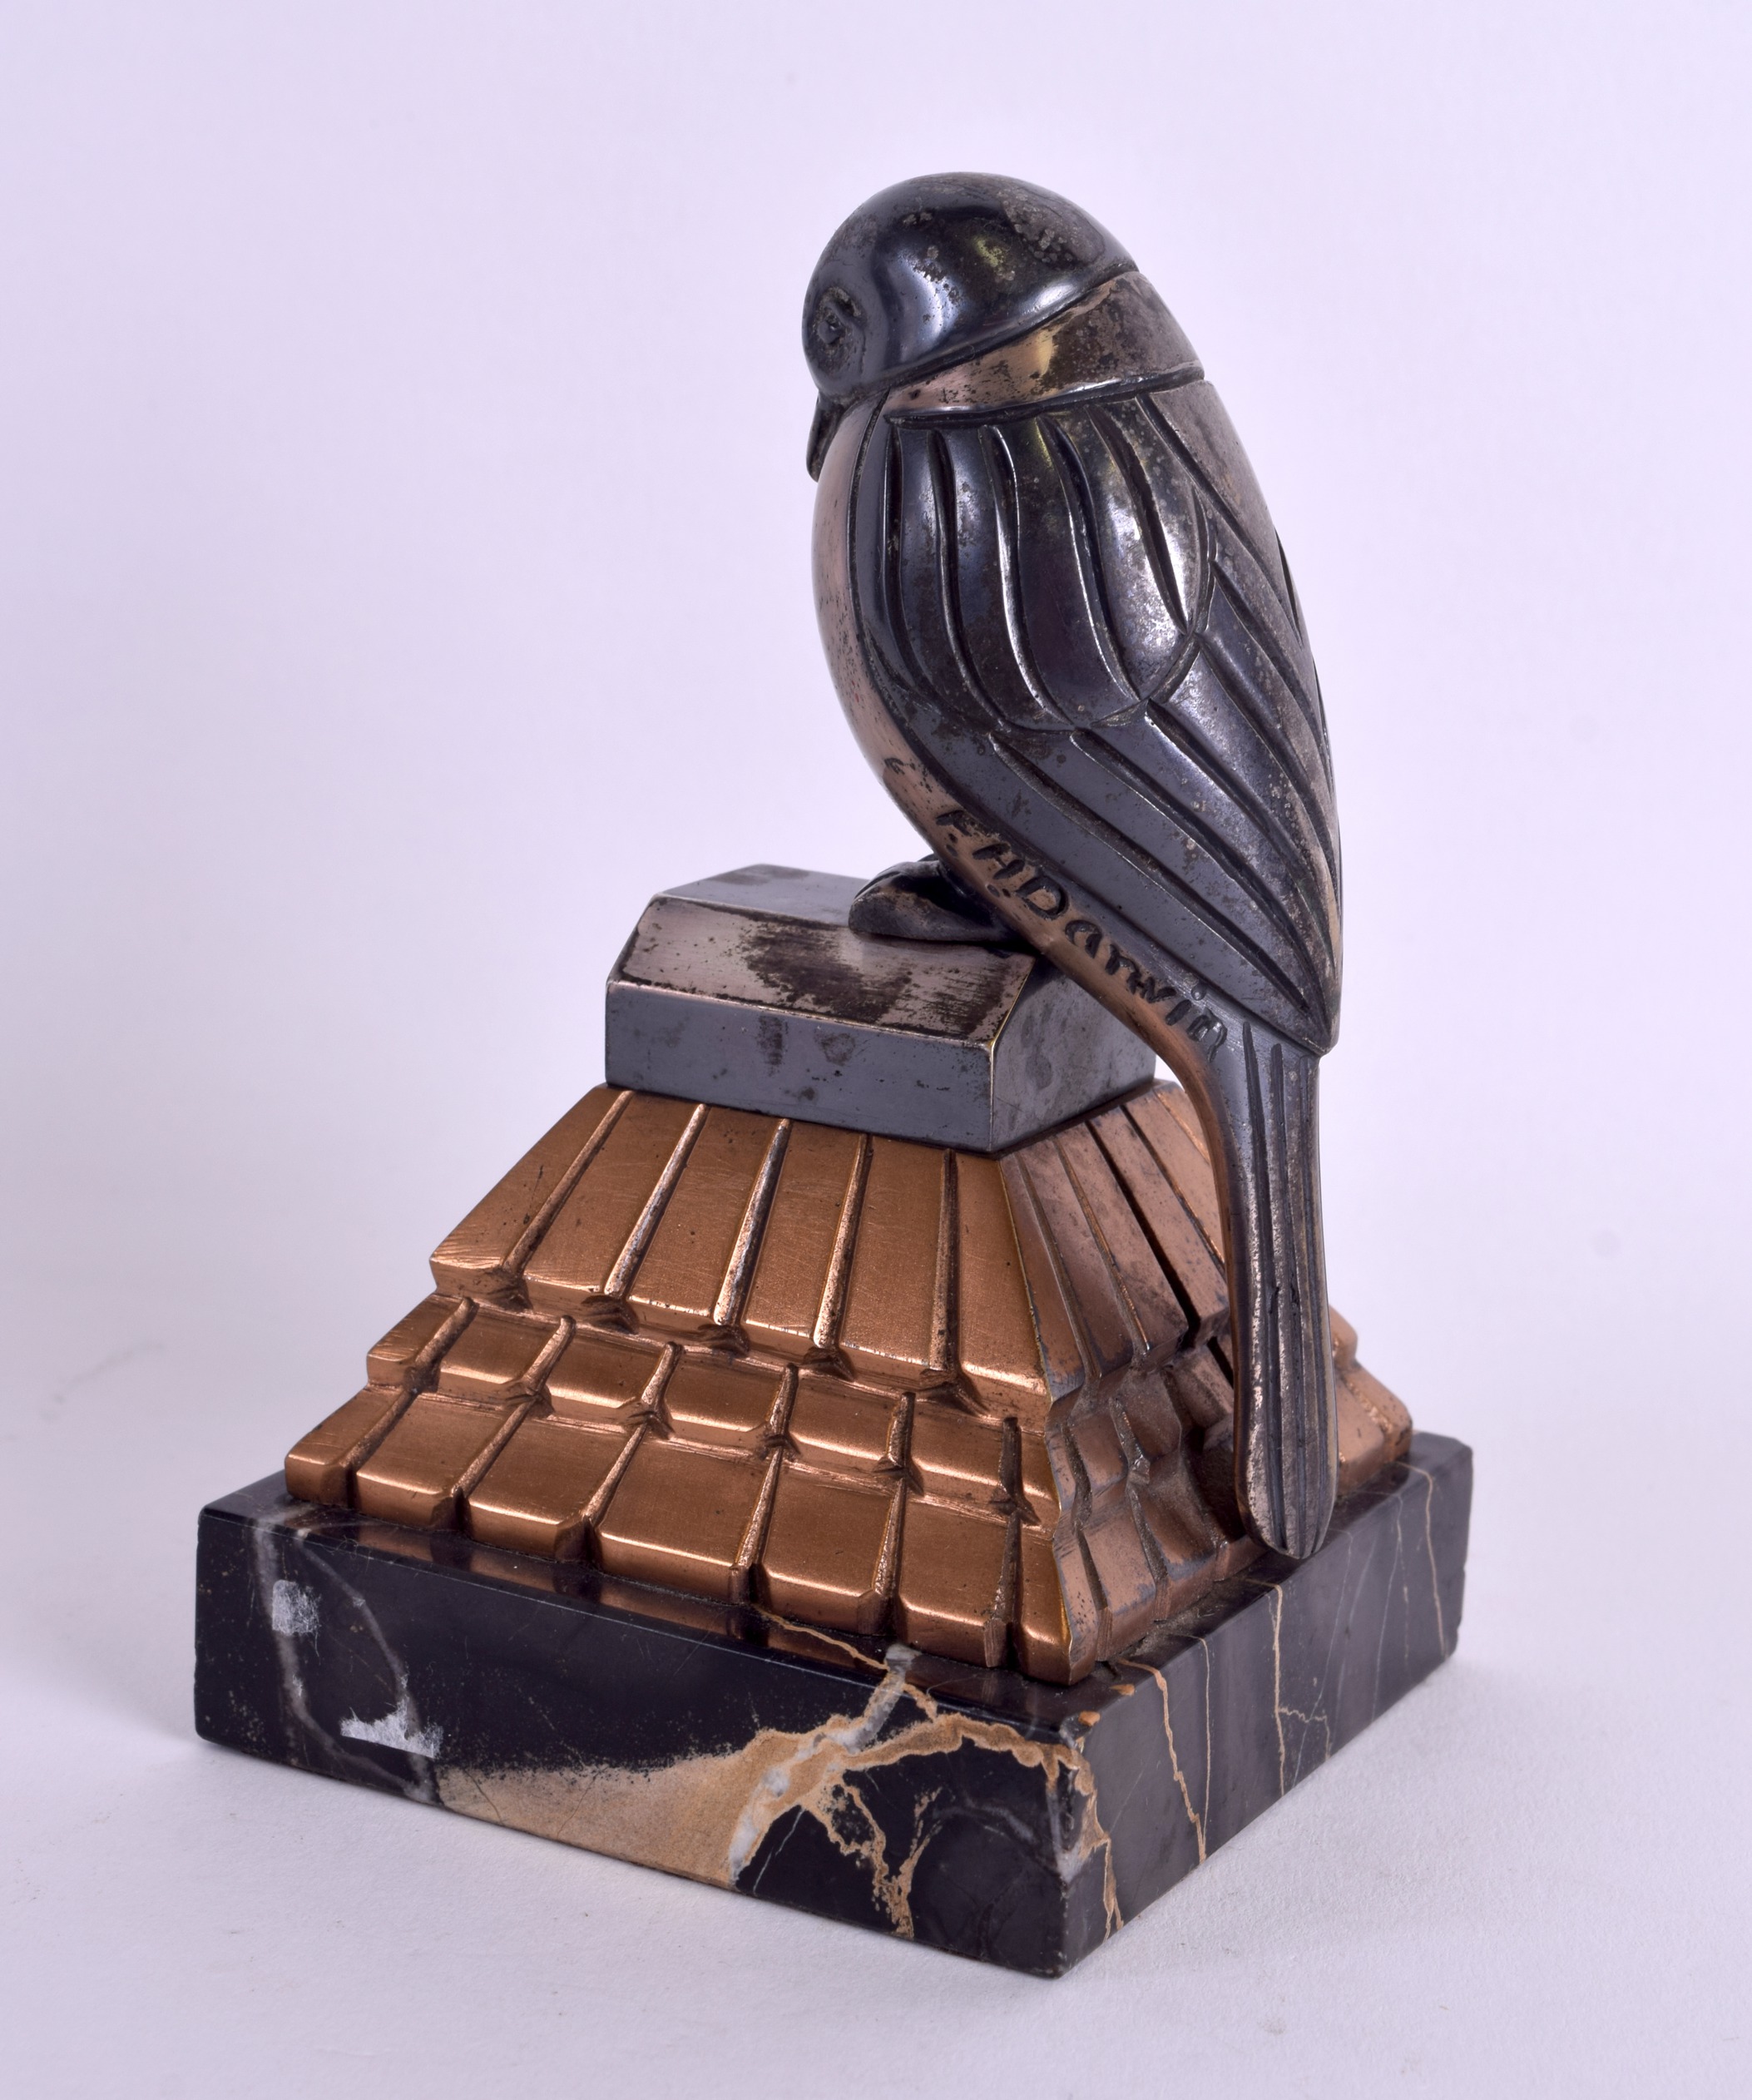 A CHARMING FRENCH ART DECO SILVERED BRONZE FIGURE OF A BIRD by F H Darwin, modelled upon a marble - Image 2 of 4